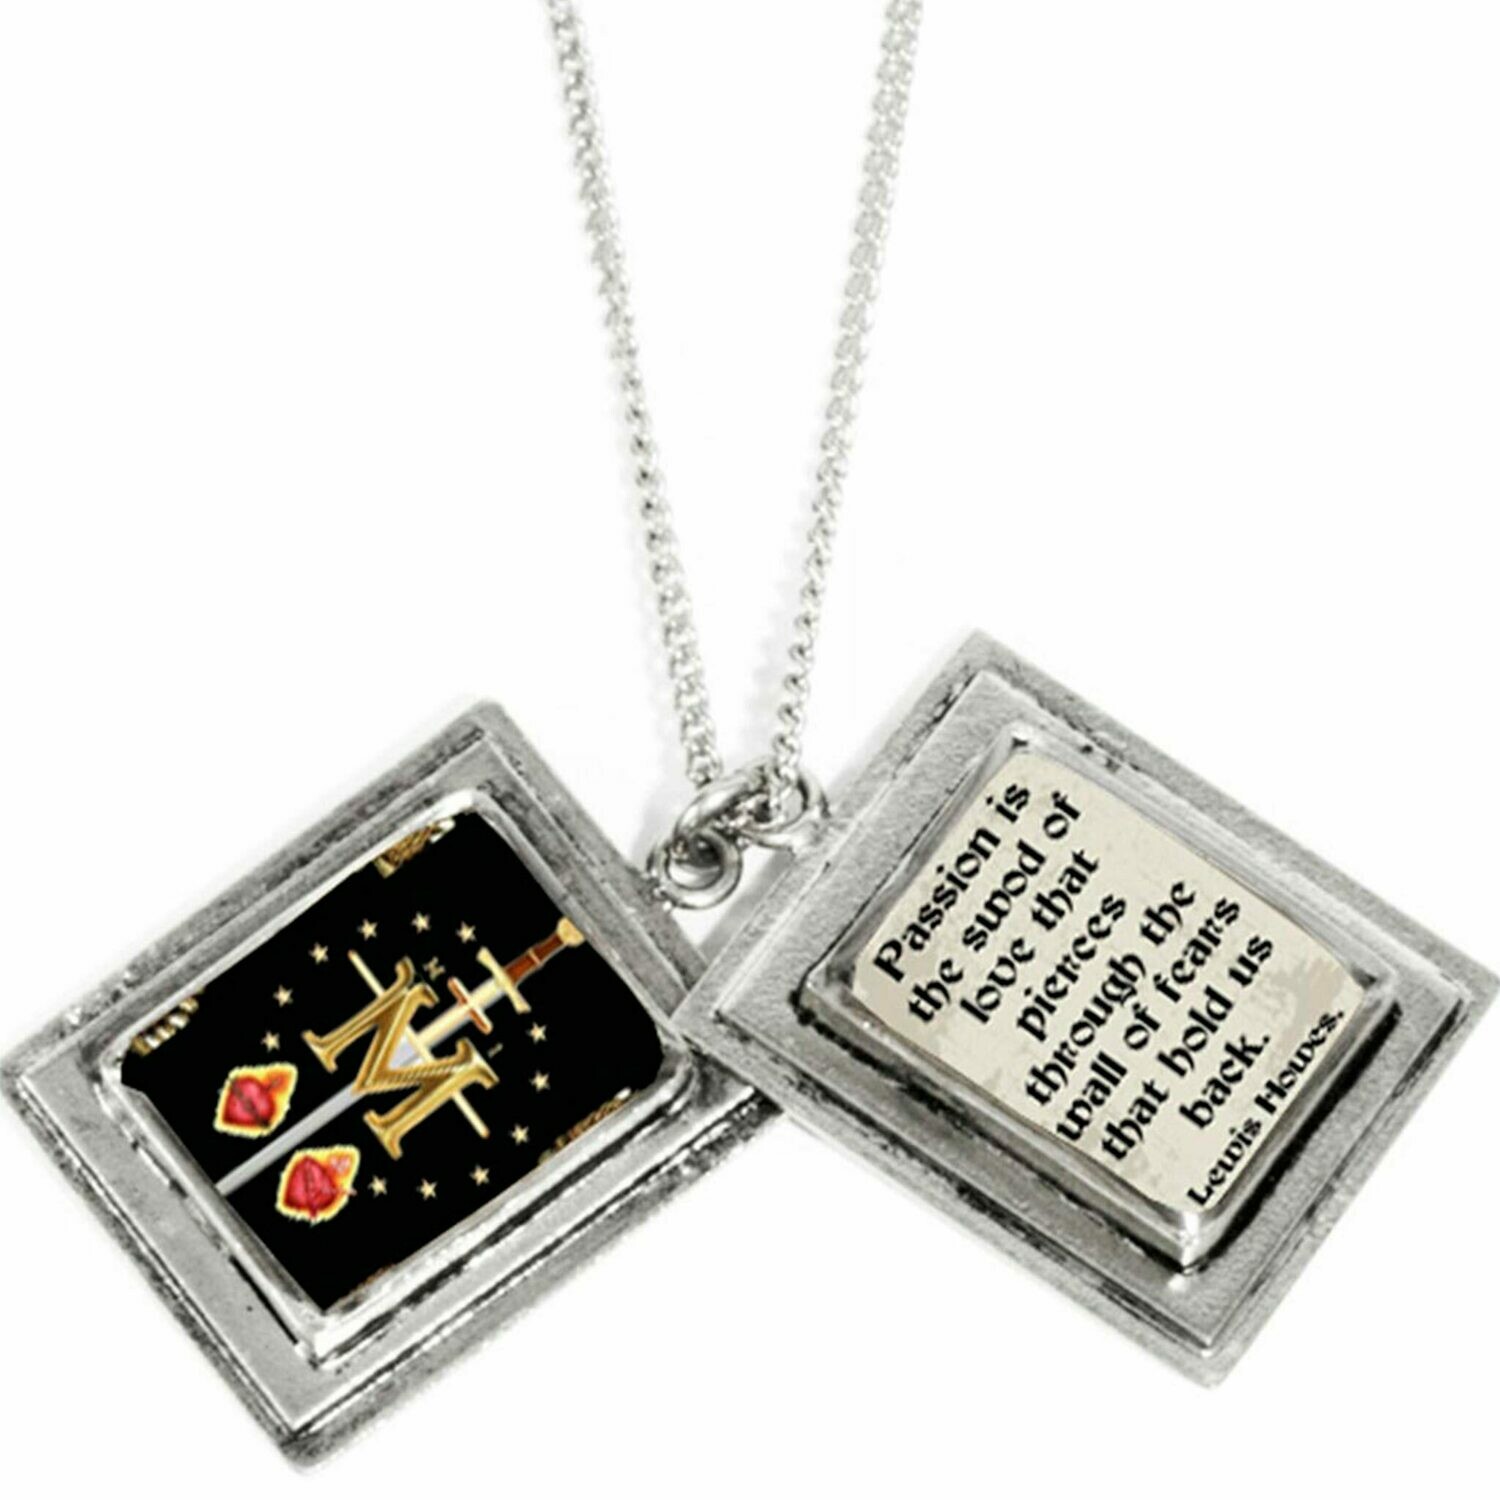 True Prayer Passion is the sword charm necklace